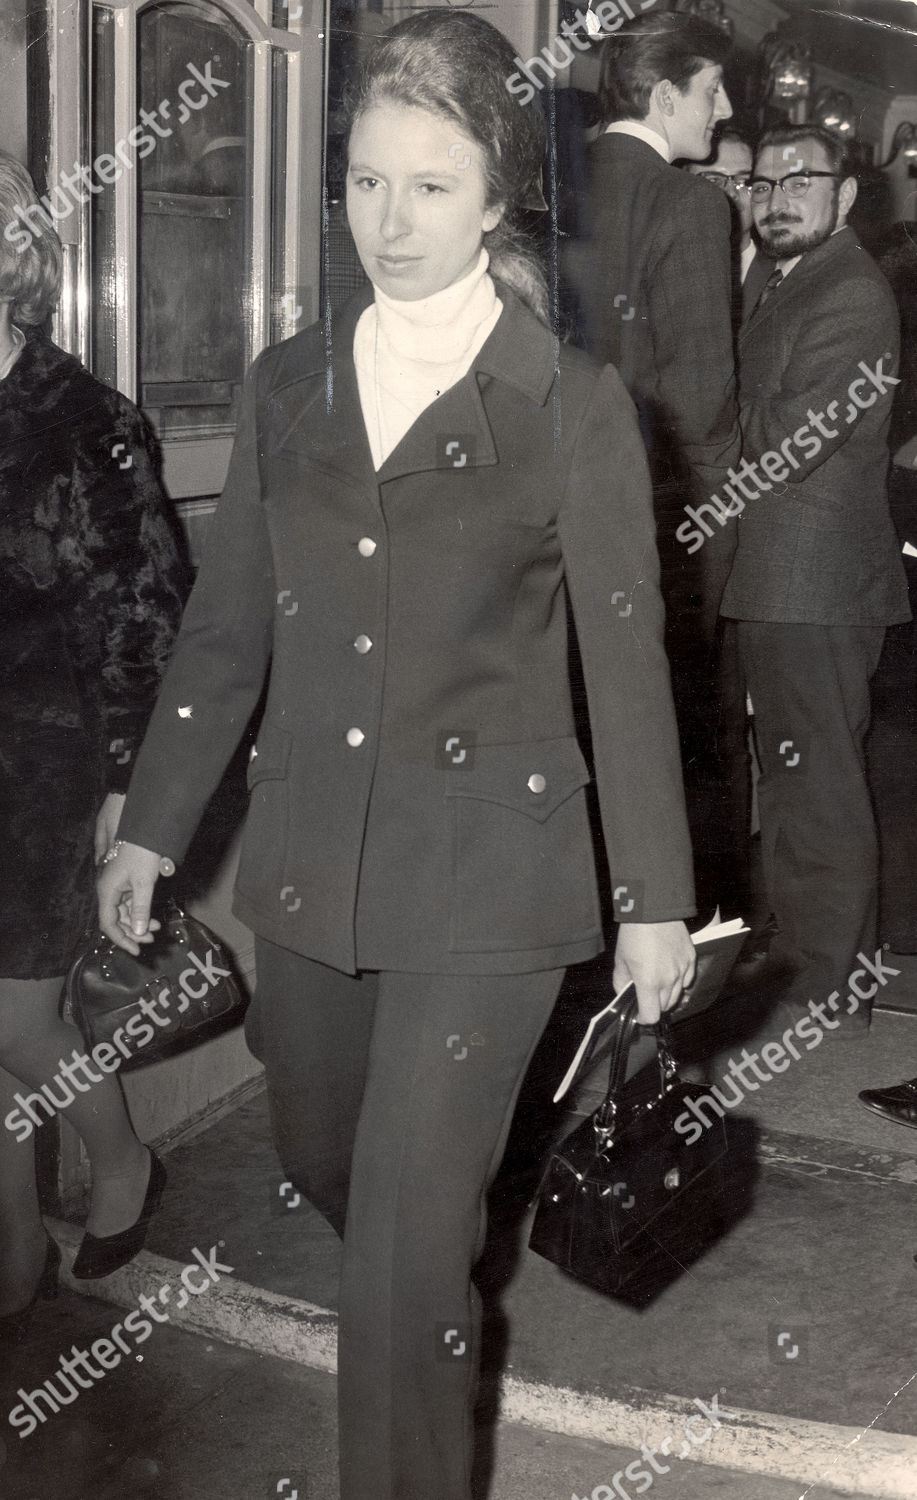 princess-anne-now-princess-royal-april-1969-princess-anne-is-seen-leaving-the-shaftesbury-theatre-after-she-danced-on-the-stage-with-other-members-of-the-audience-at-the-end-of-the-hippy-musical-hair-shutterstock-editorial-1030268a.jpg